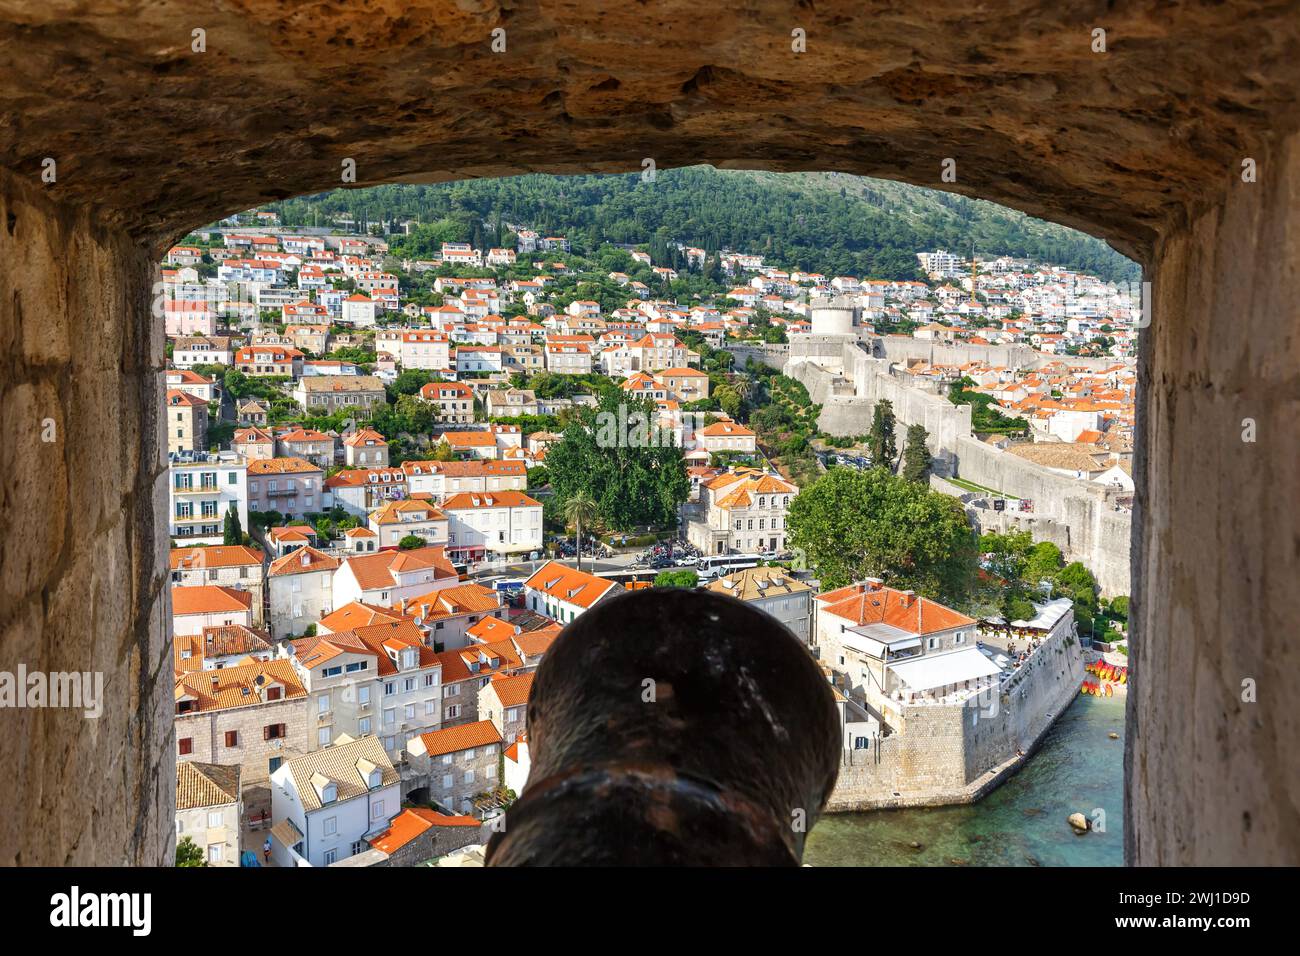 View of the old town through an opening in the wall of the fortress with a cannon in Dubrovnik, Croatia Stock Photo